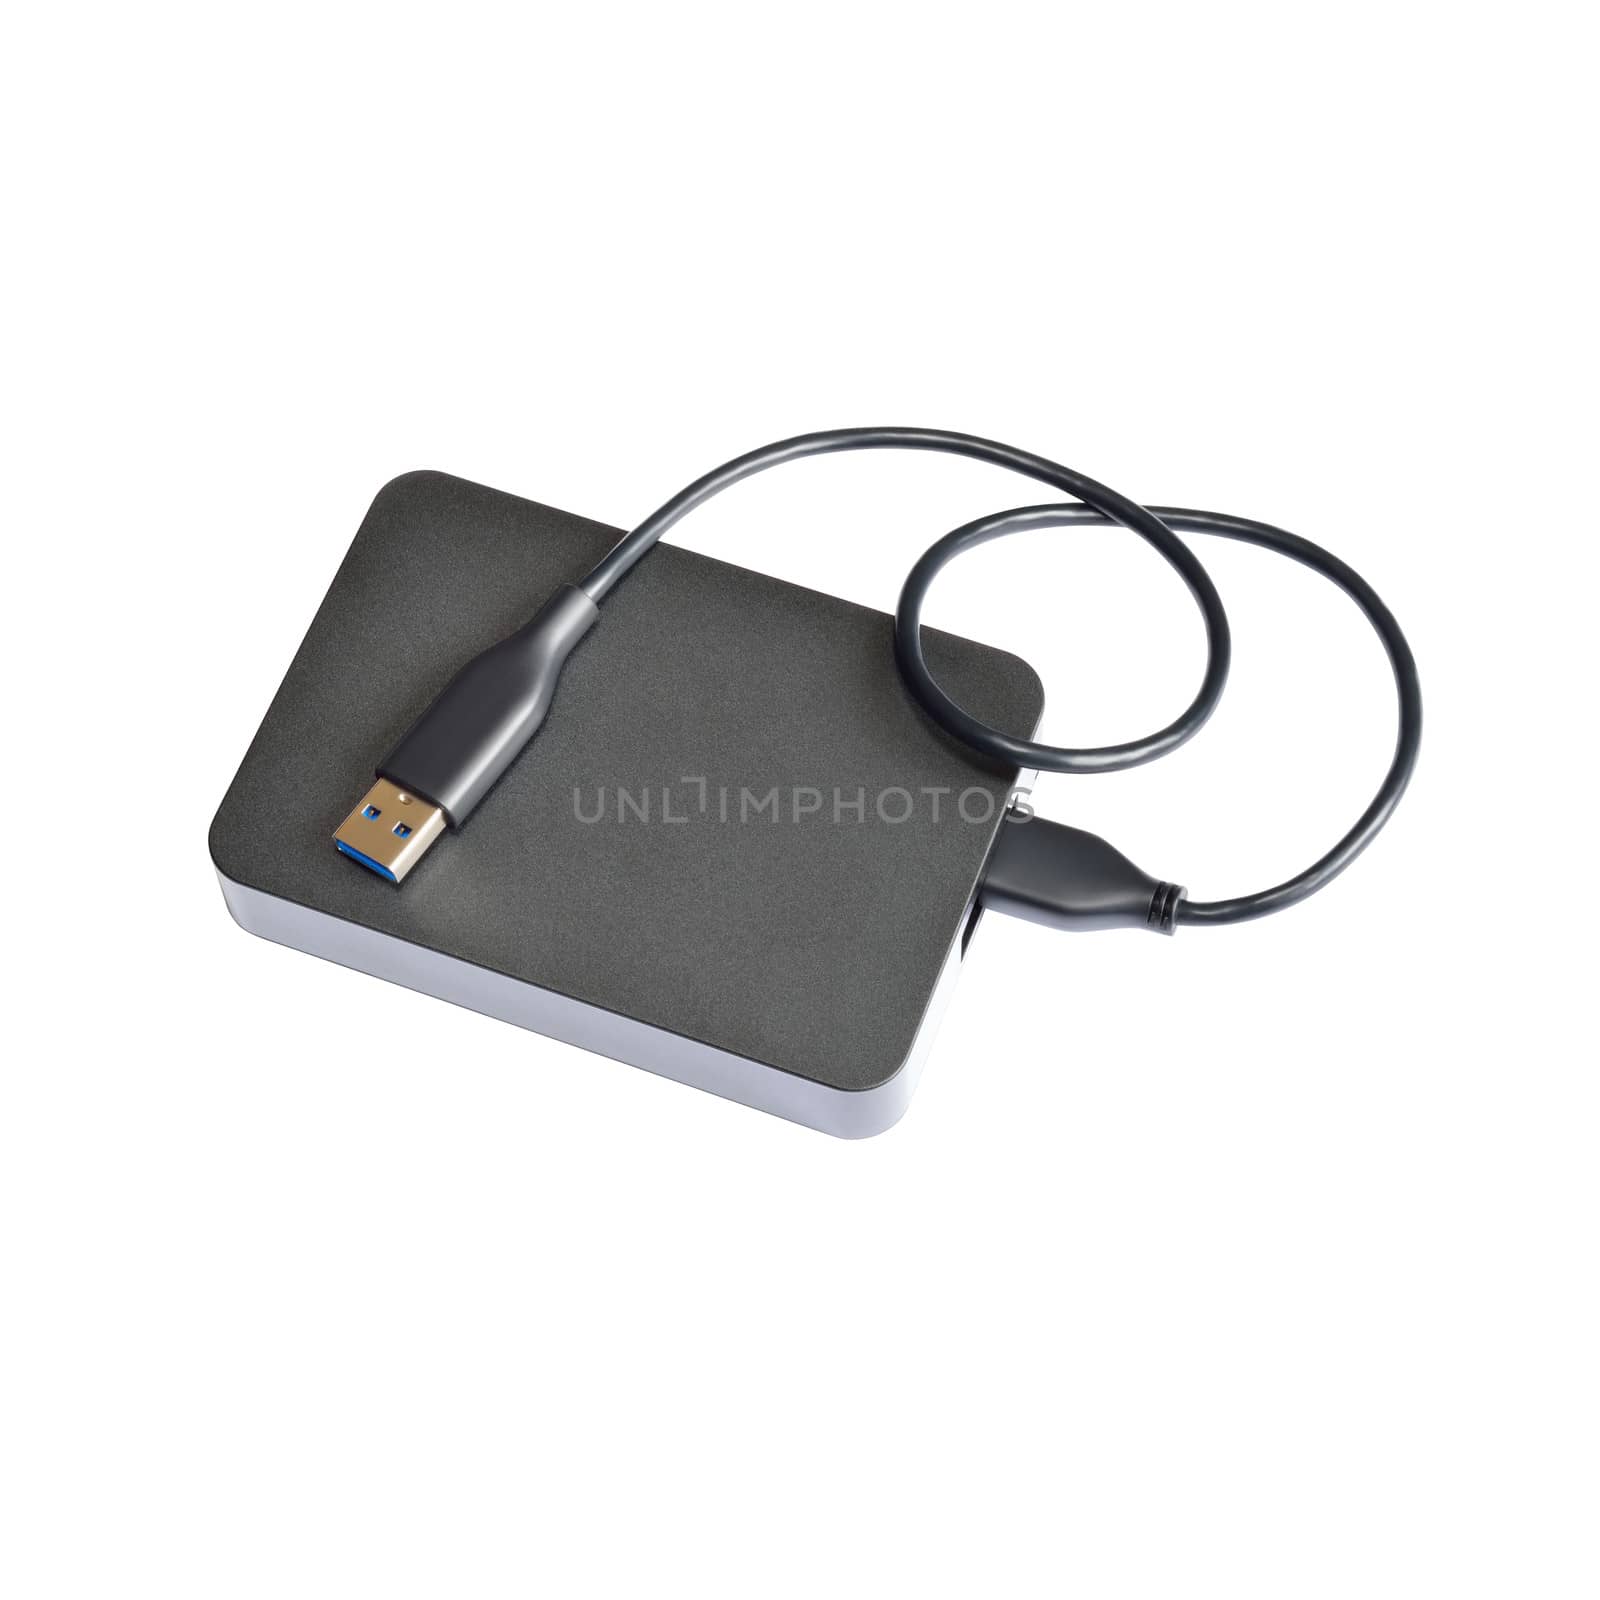 External hard drive isolated on white w/ clipping path